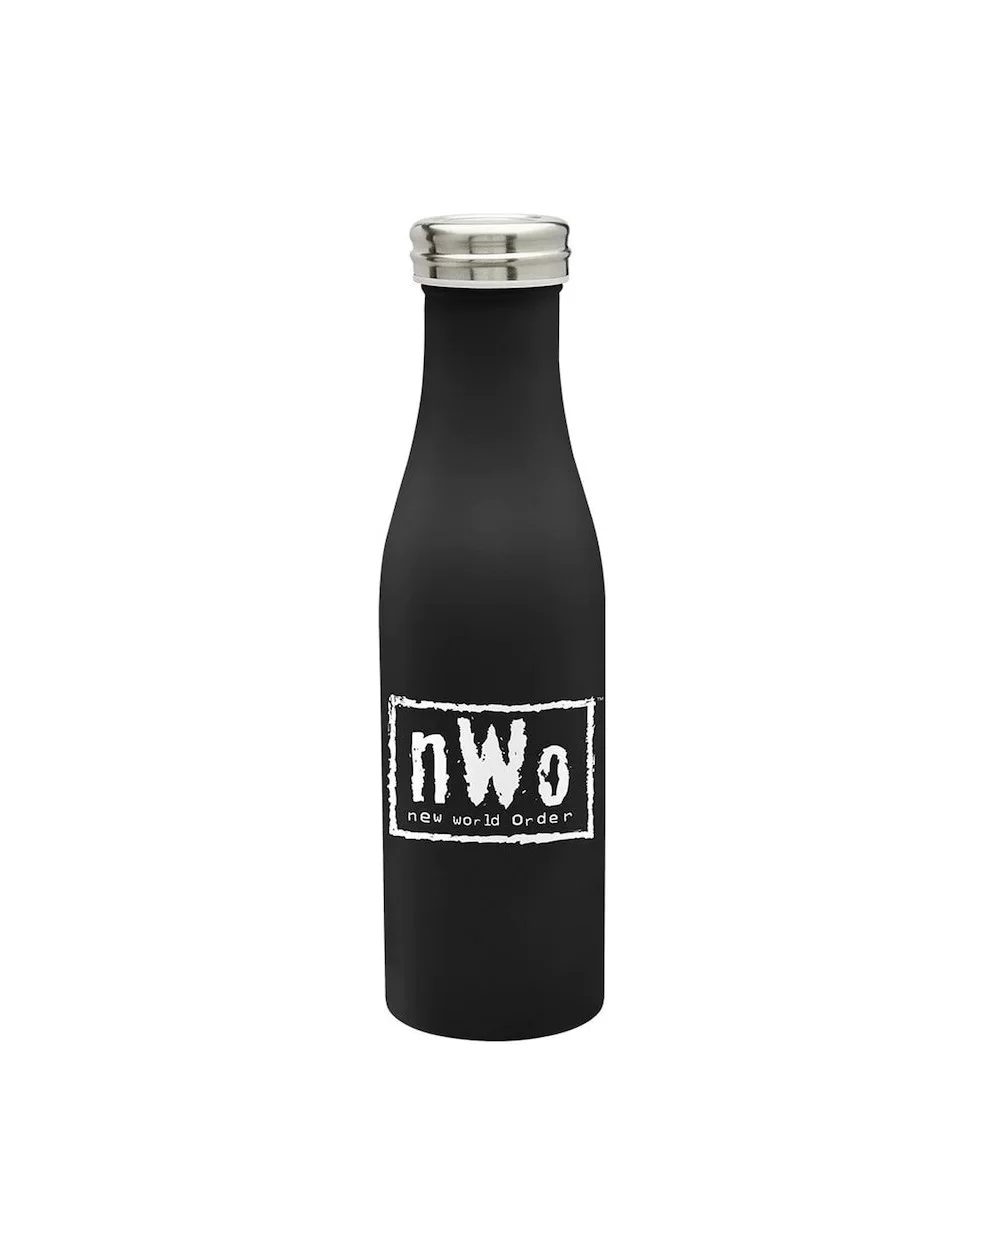 nWo Stainless Steel Water Bottle $4.48 Home & Office